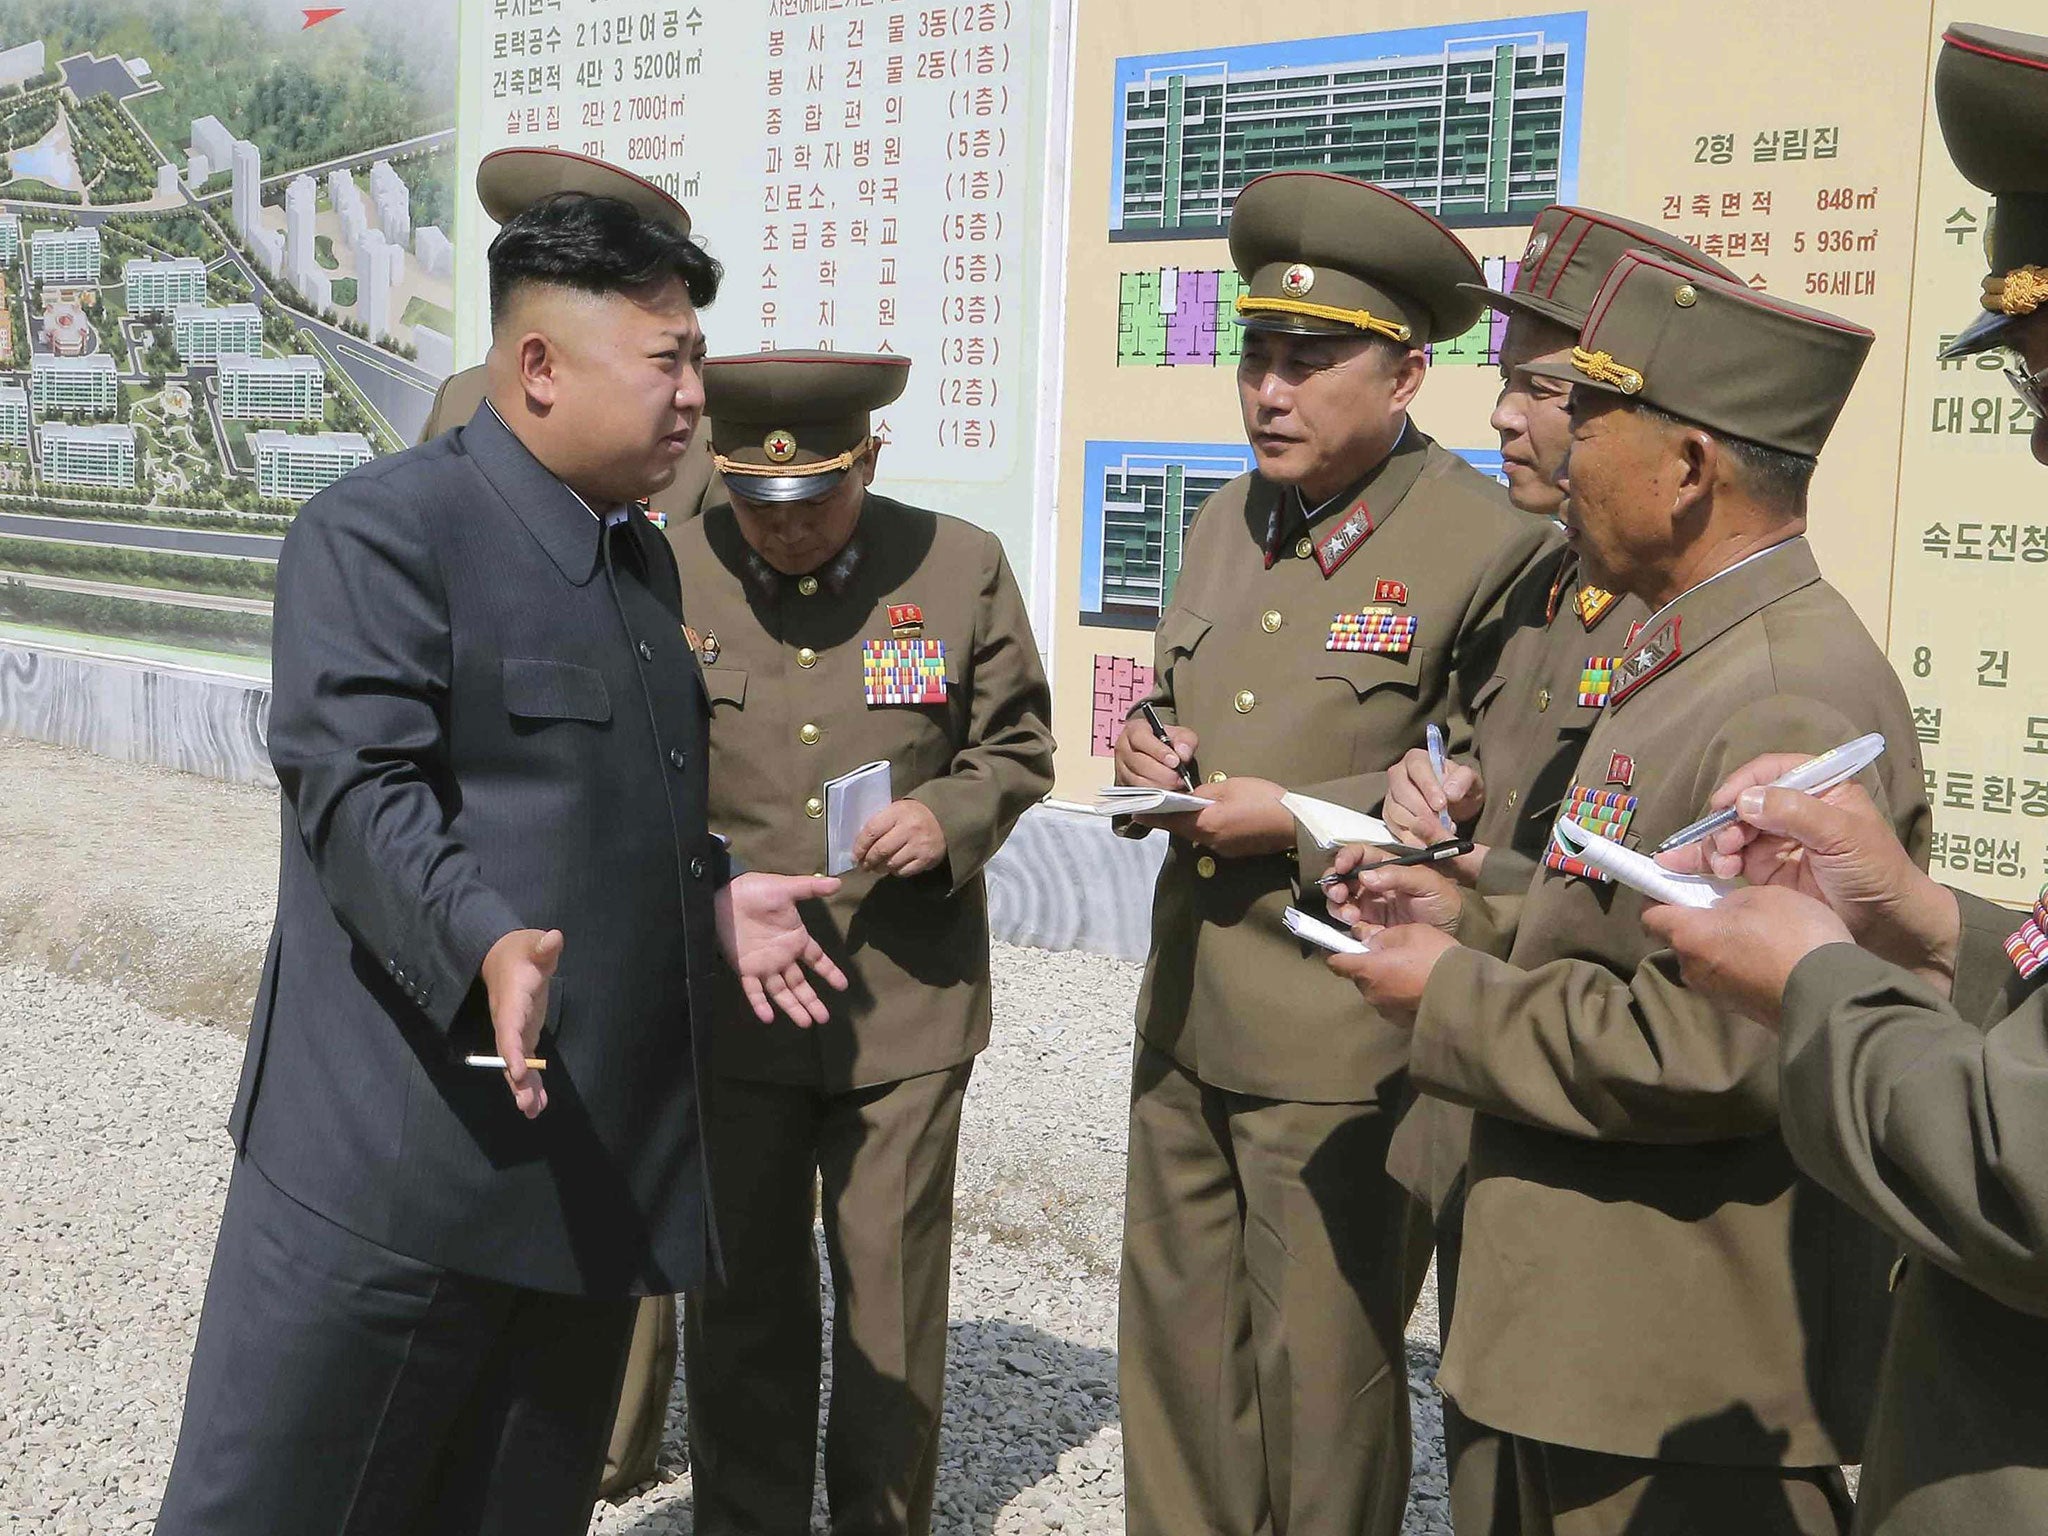 Kim gives on the spot guidance during an official visit